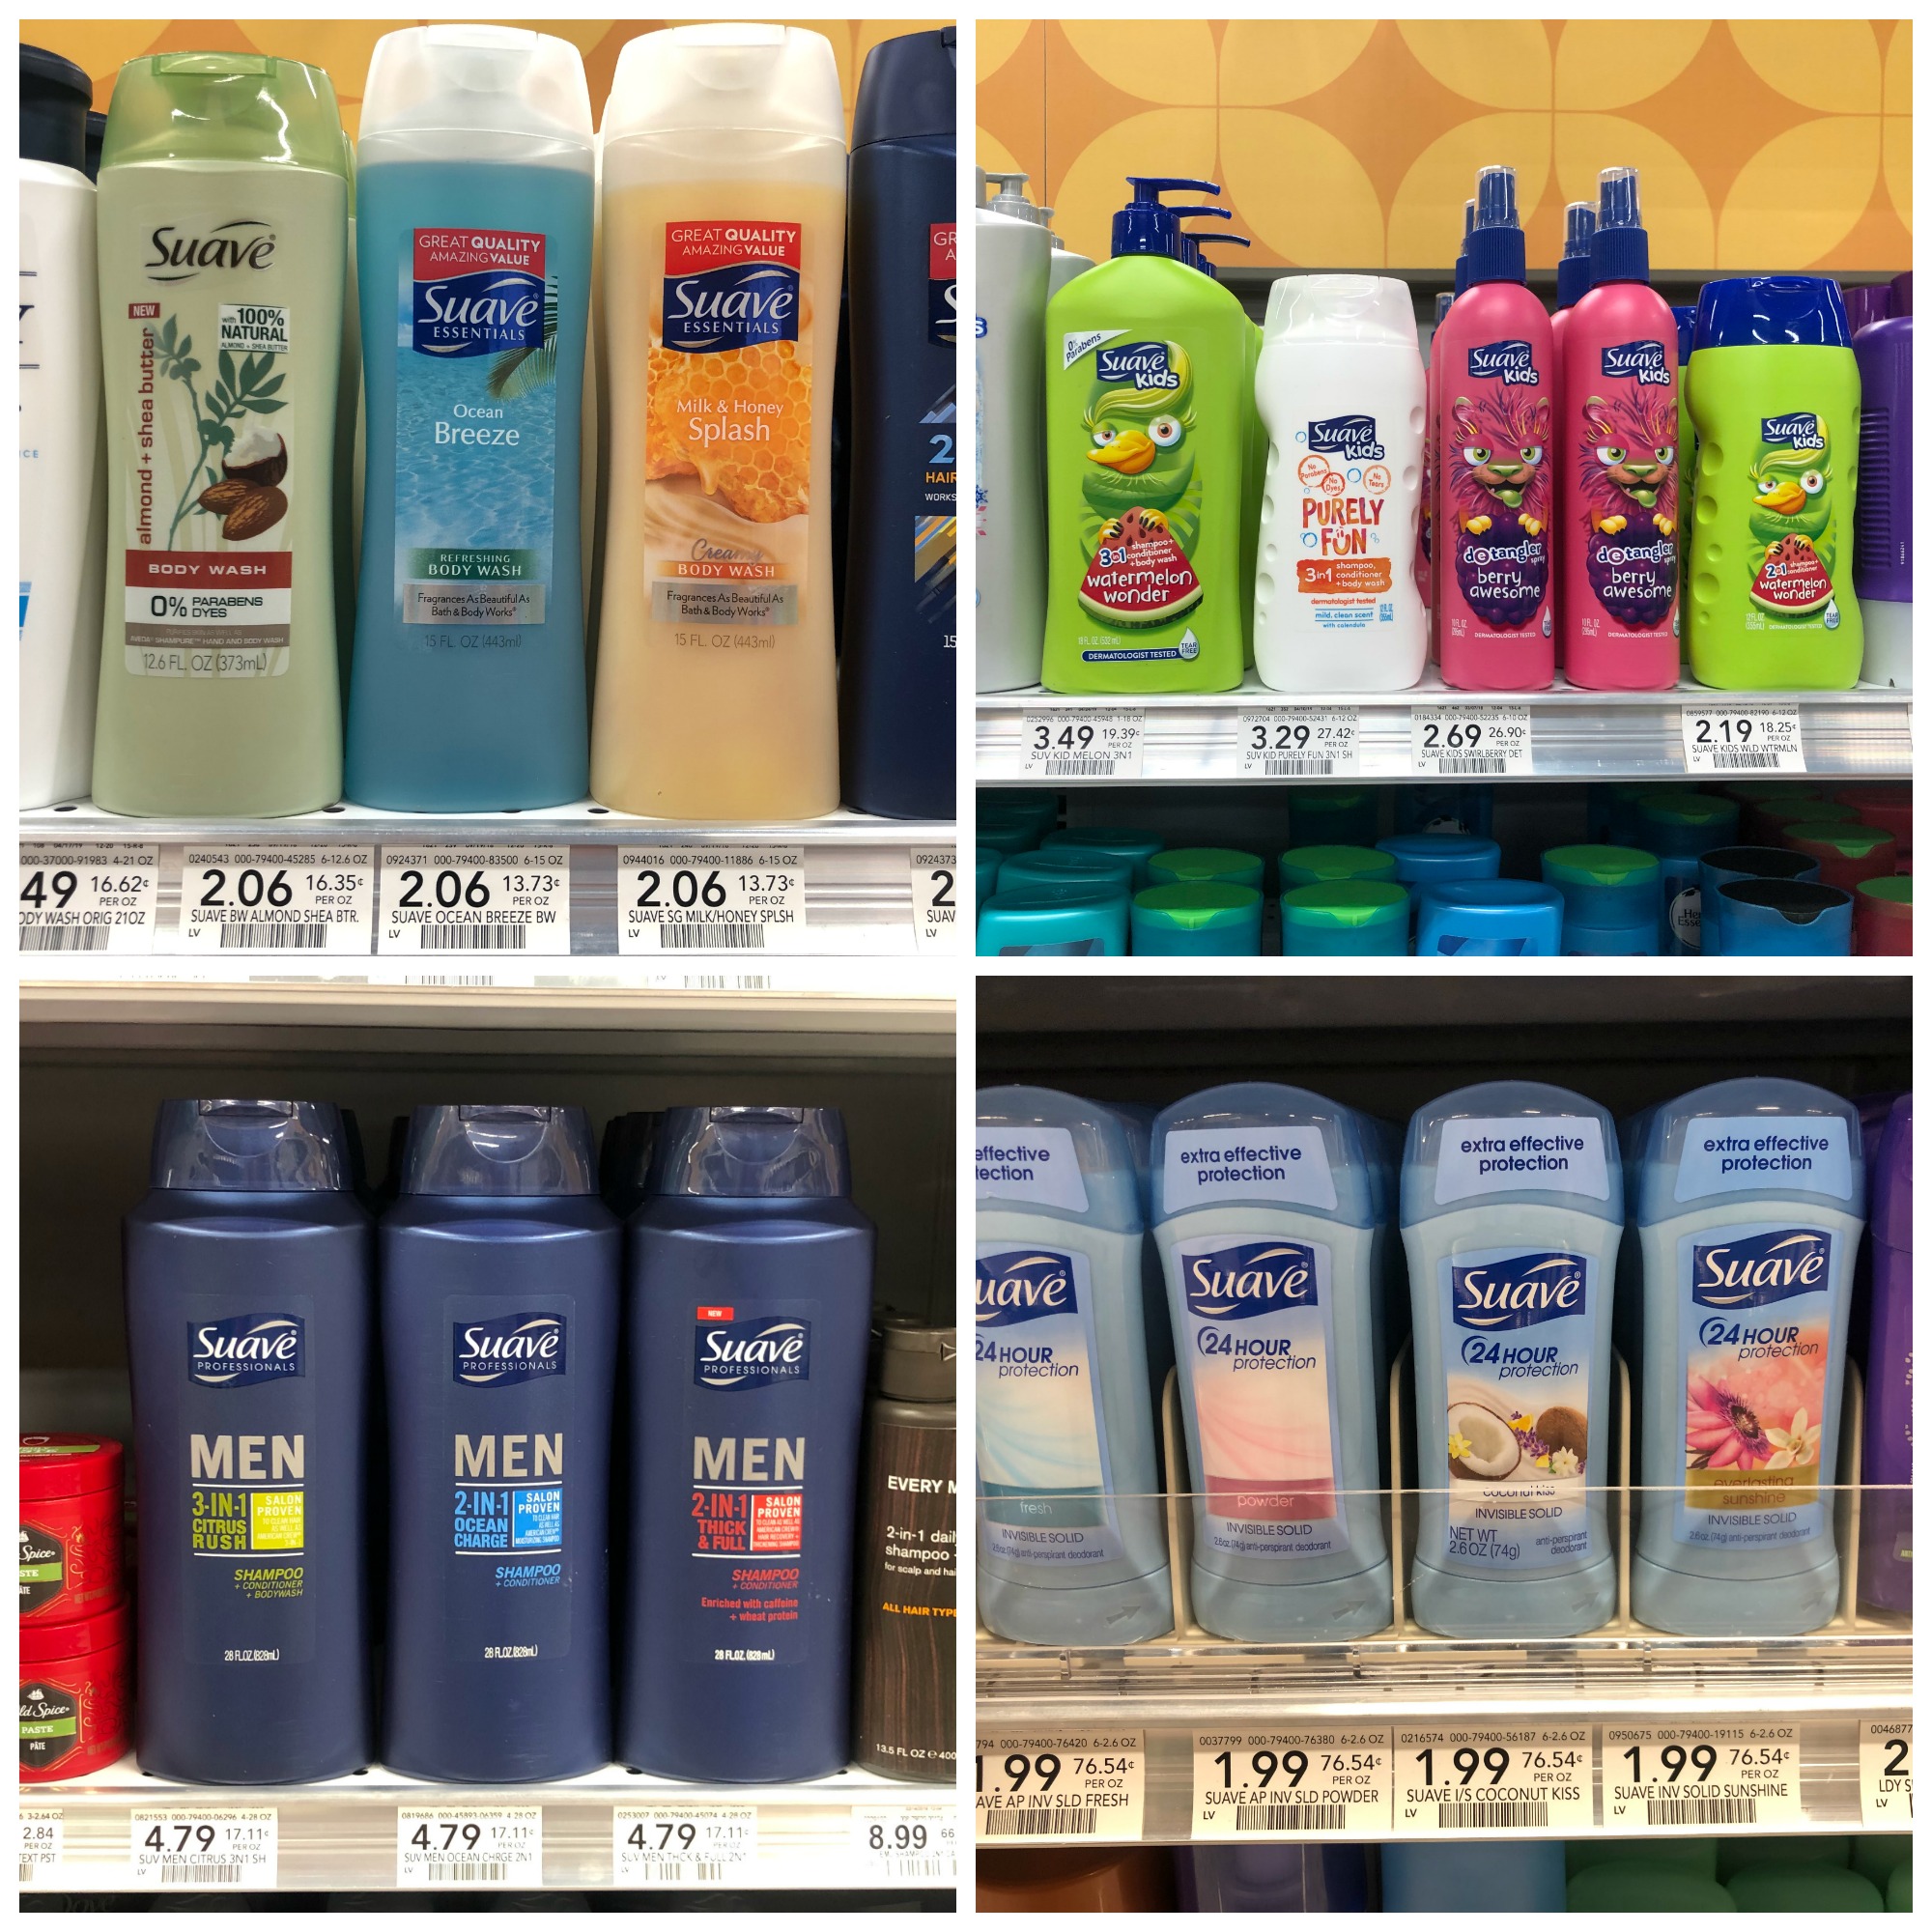 Save On Personal Care Products For The Whole Family - Save On Dove, Suave & Love Beauty and Planet Products At Publix on I Heart Publix 1